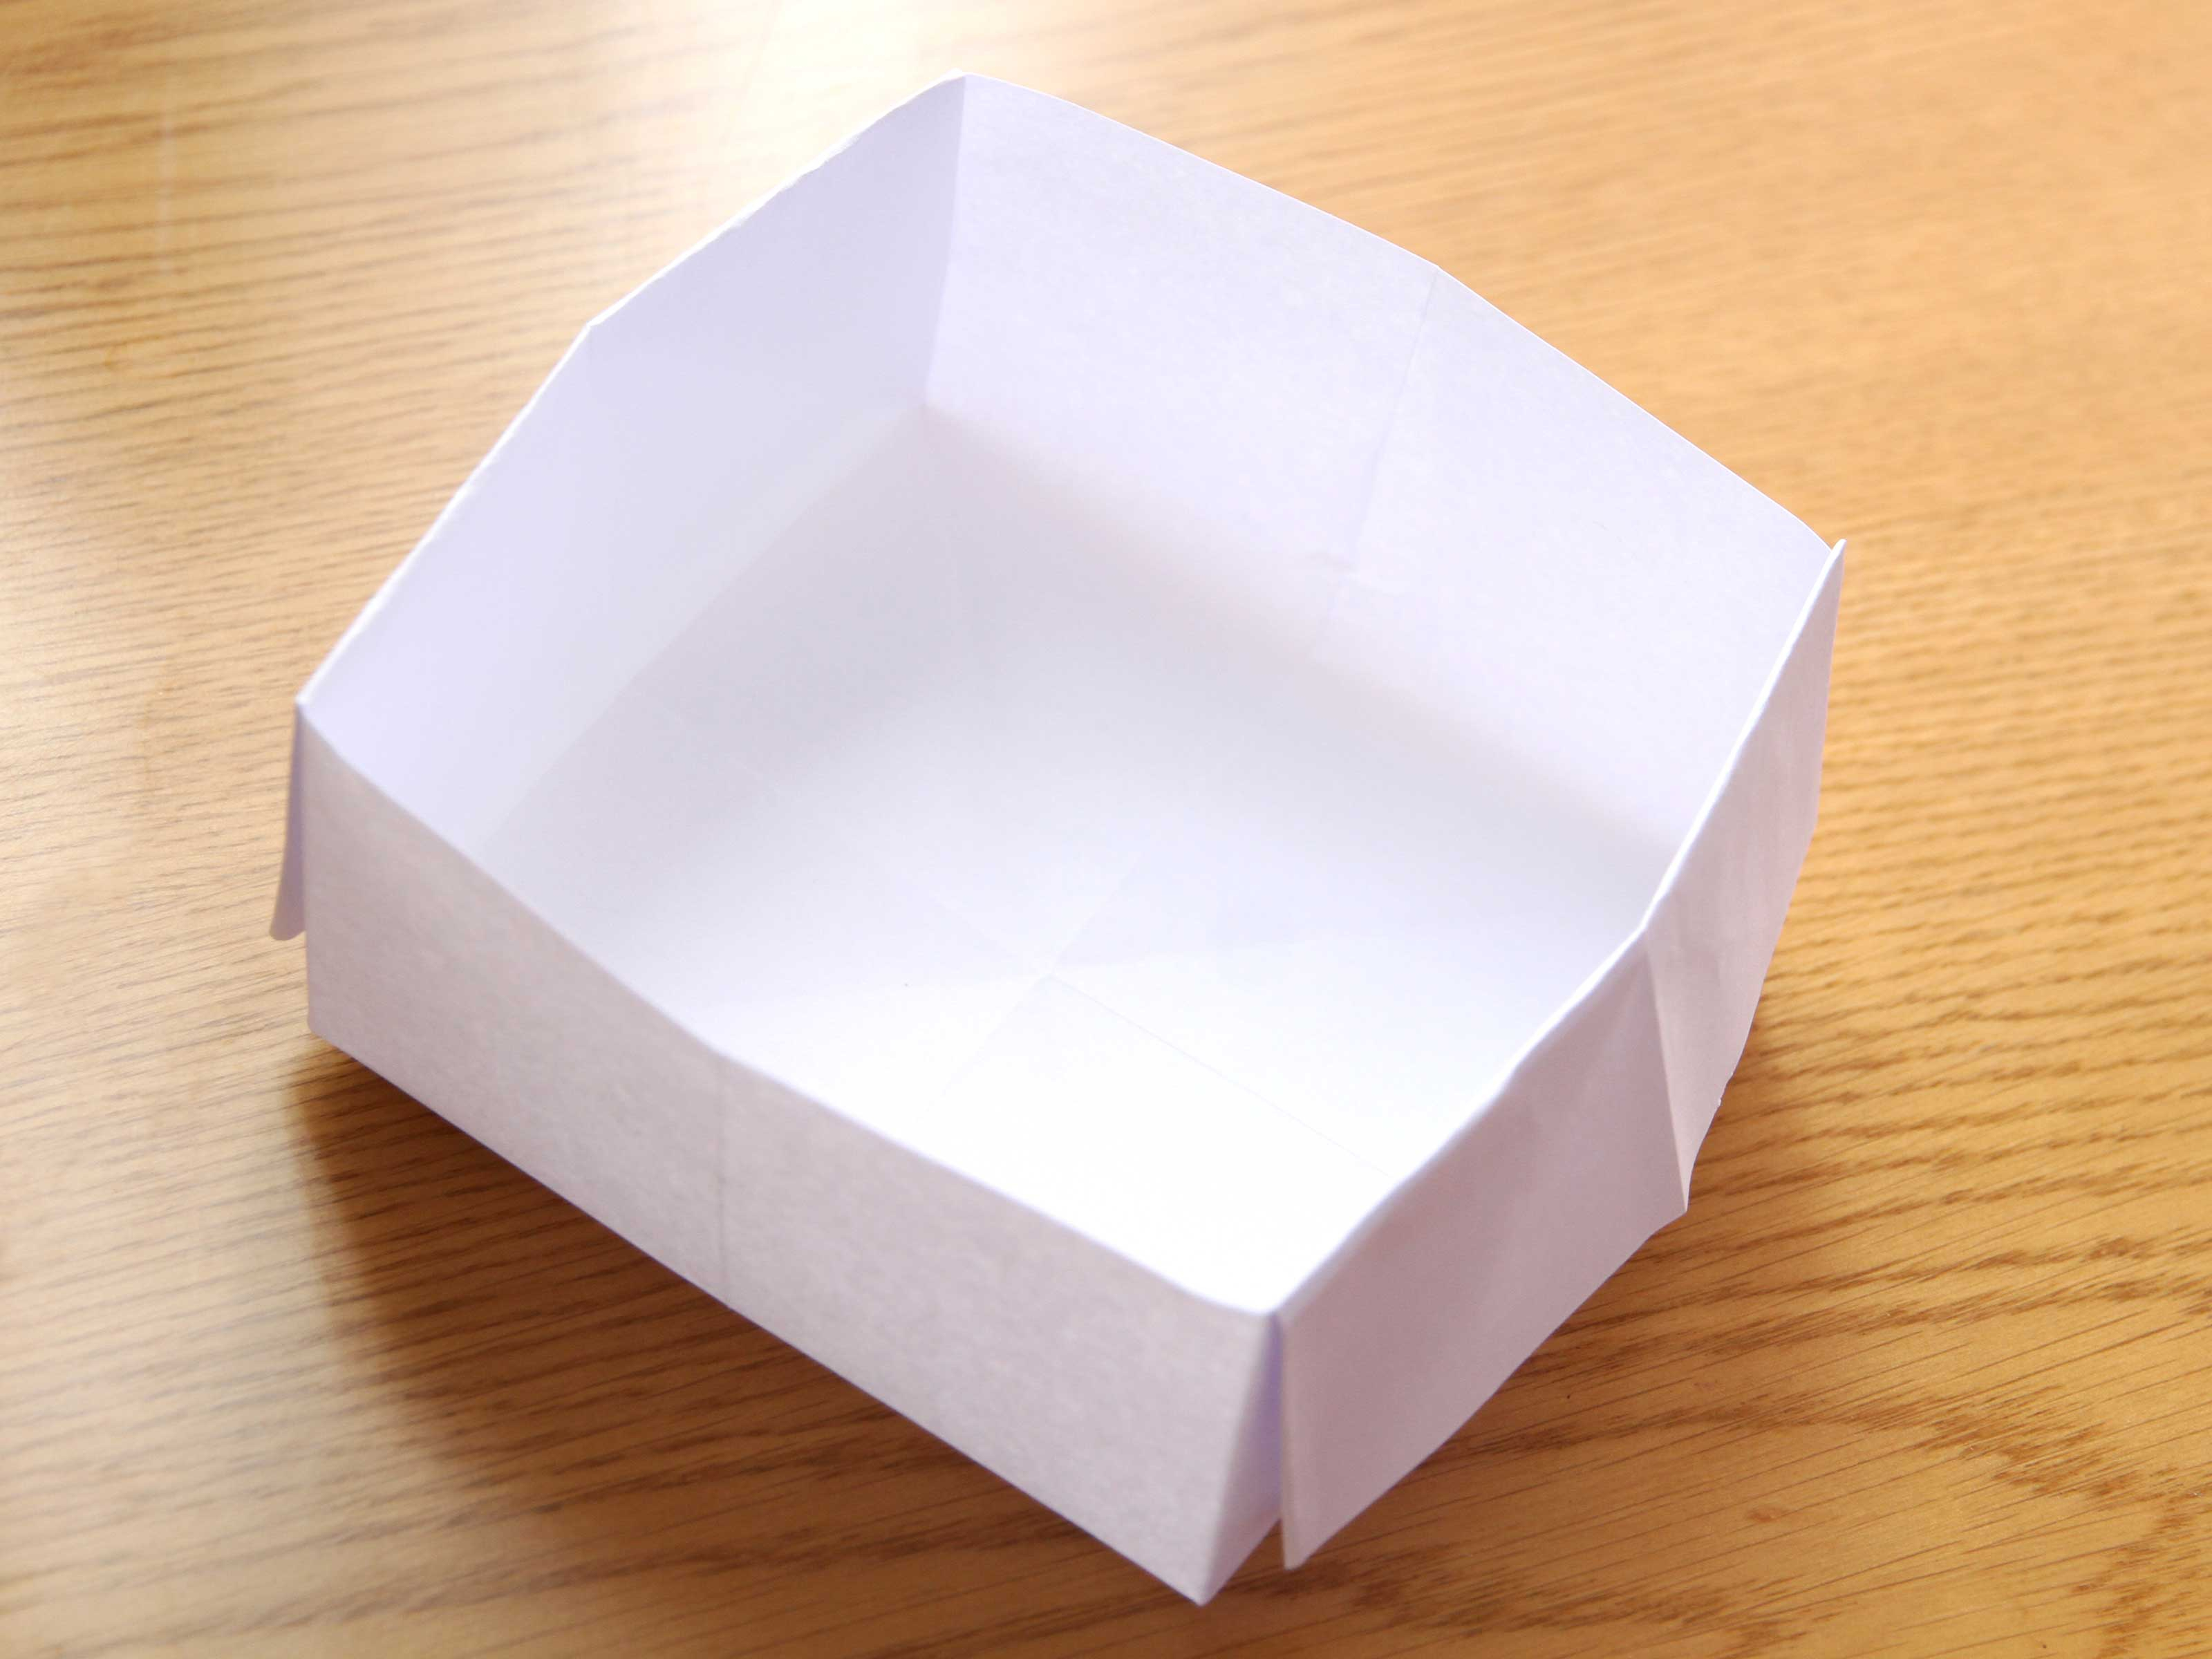 How To Do A Origami Box How To Make An Origami Box With Printer Paper 12 Steps